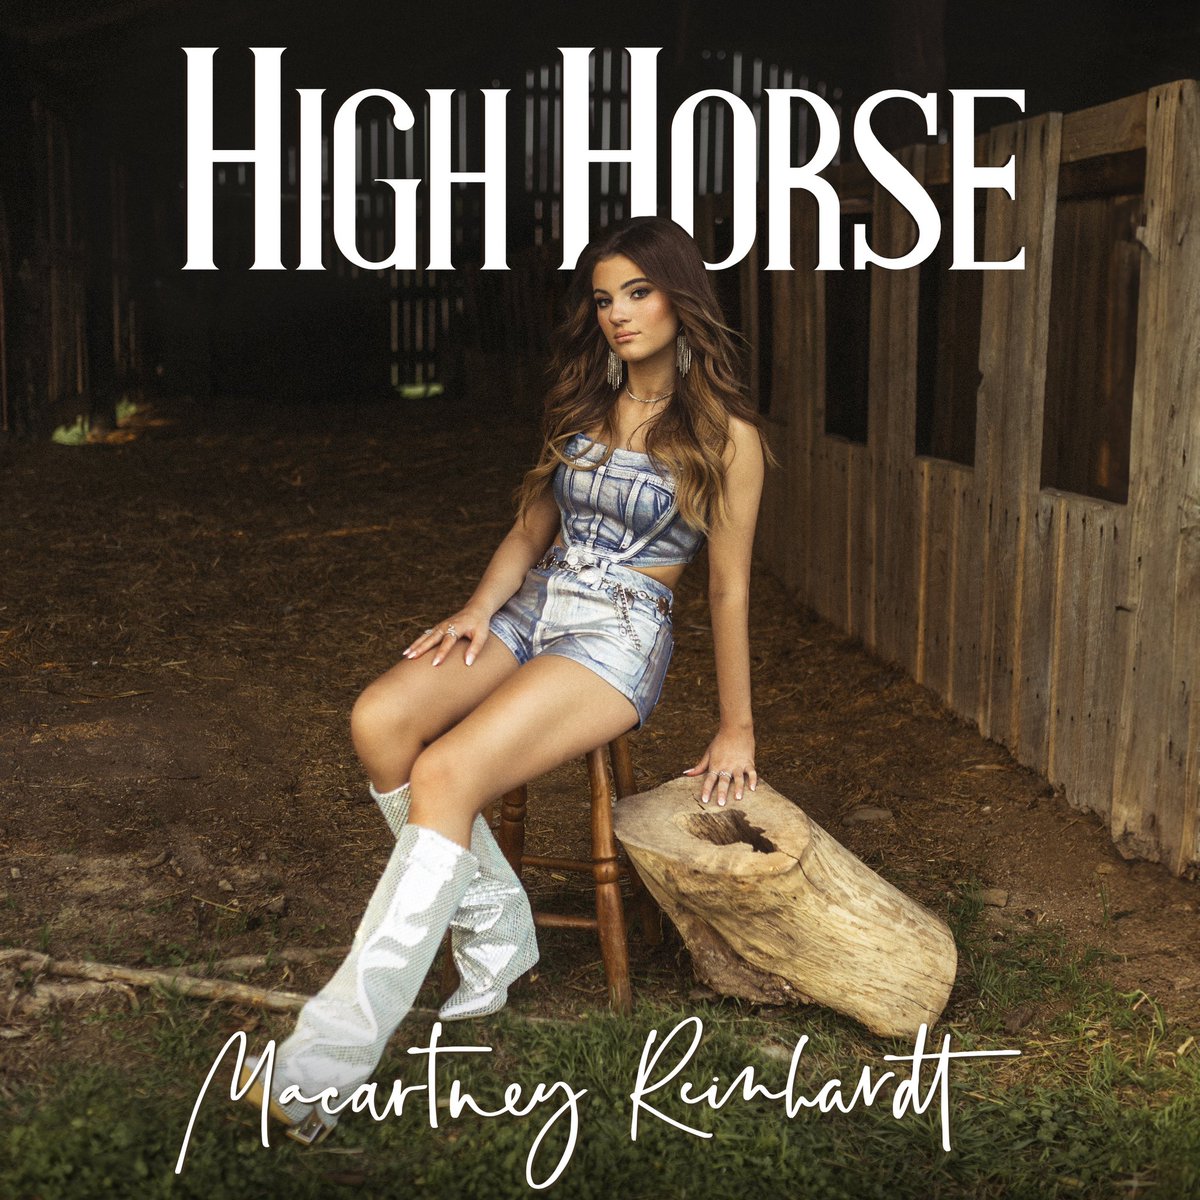 So excited to announce my next single “High Horse” out on all platforms MAY 3RD✨ Cannot wait to share this one with you guys!! PRESAVE NOW LINK
IN BIO 🏇❤️
#newmusic #nashville #singersongwriter #country #artist